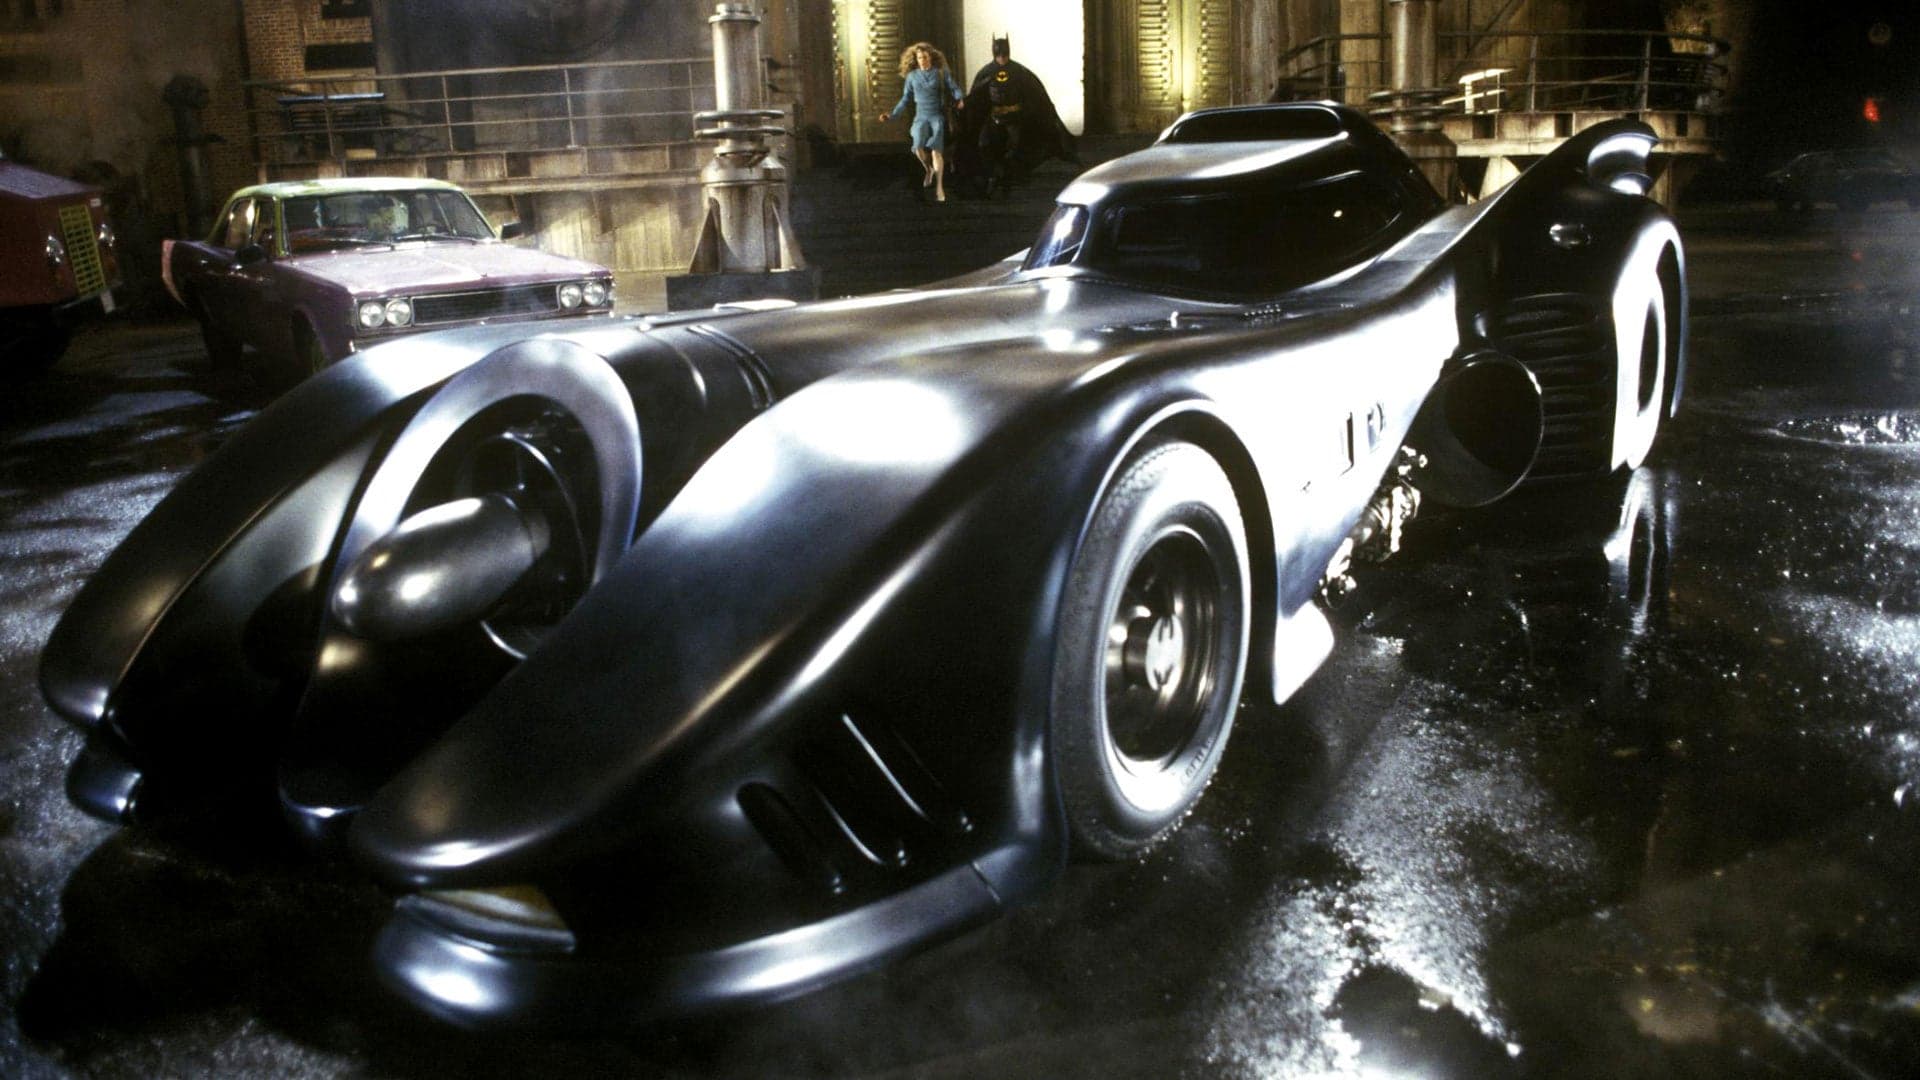 A Batmobile From Tim Burton’s Batman Is for Sale in Russia for $1.1 Million